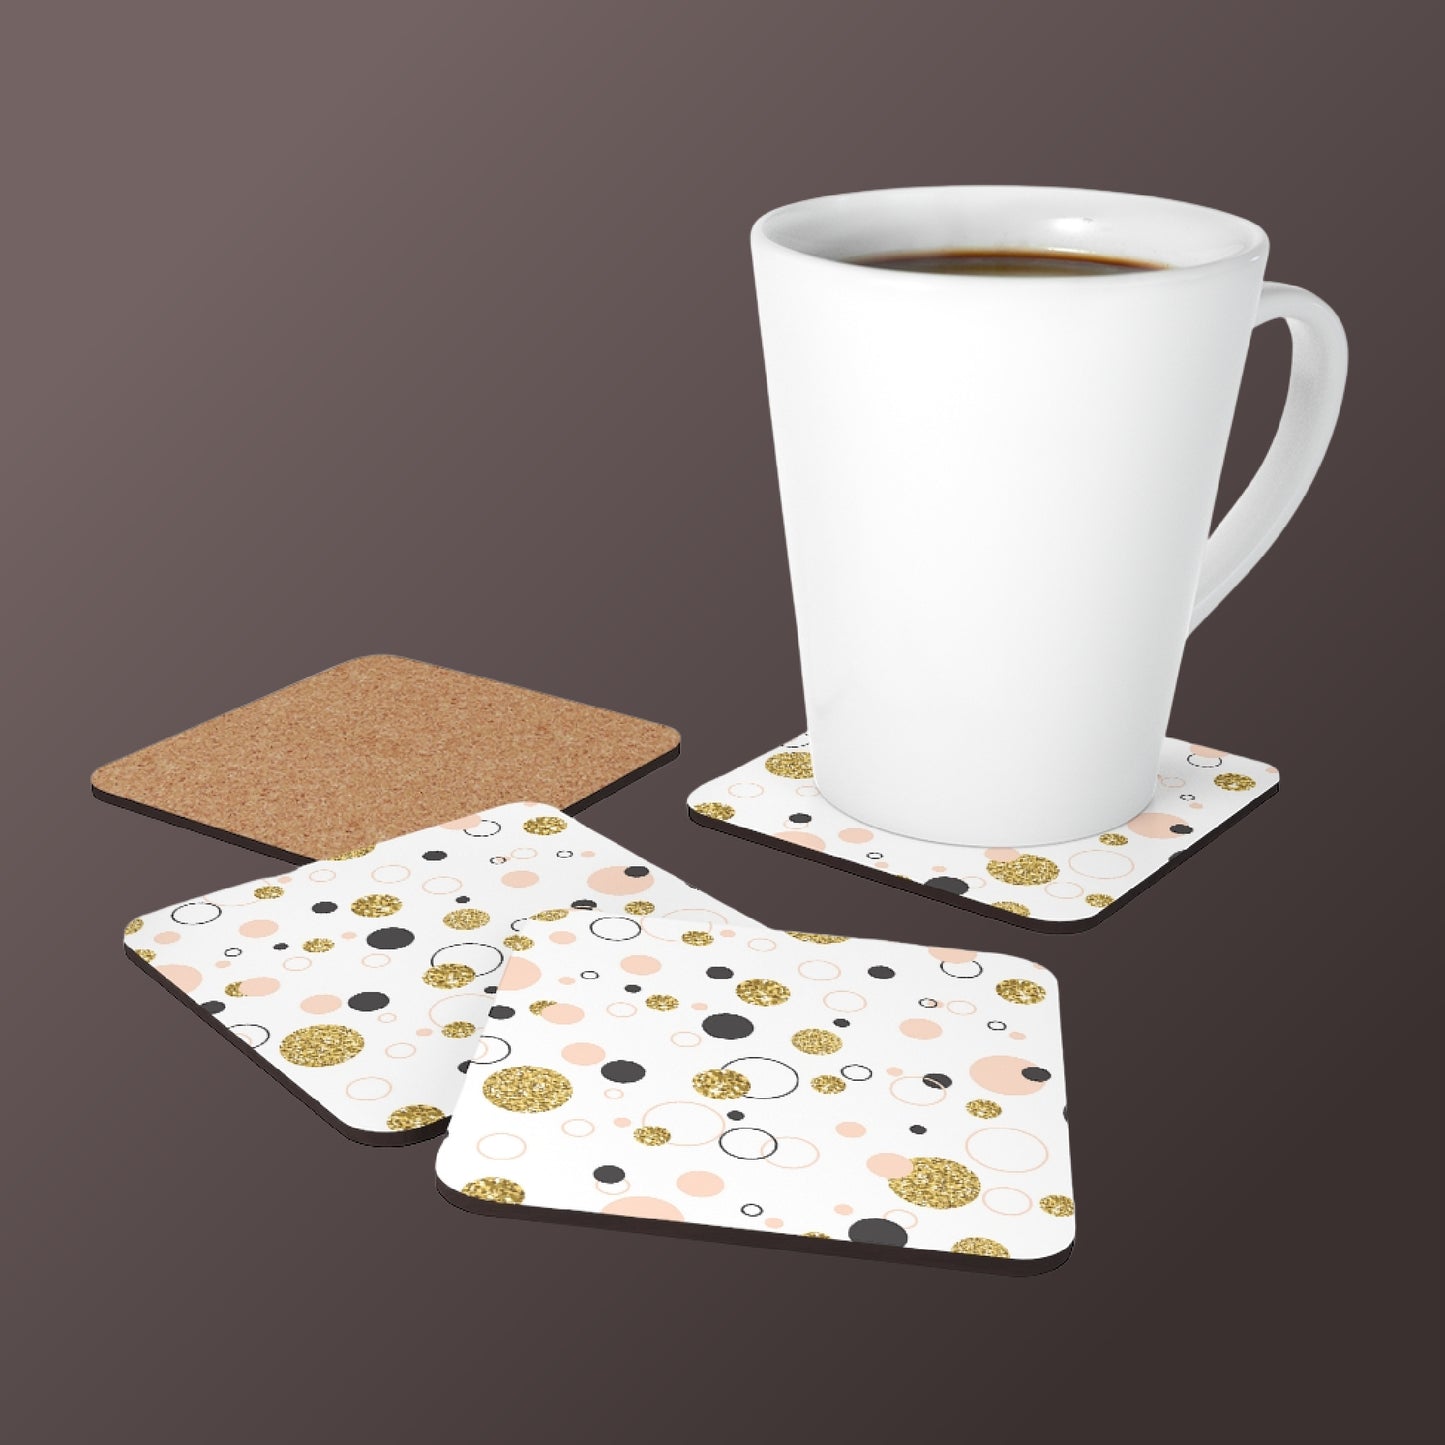 Mock up of the 4 coasters and a latte mug on one of the coasters